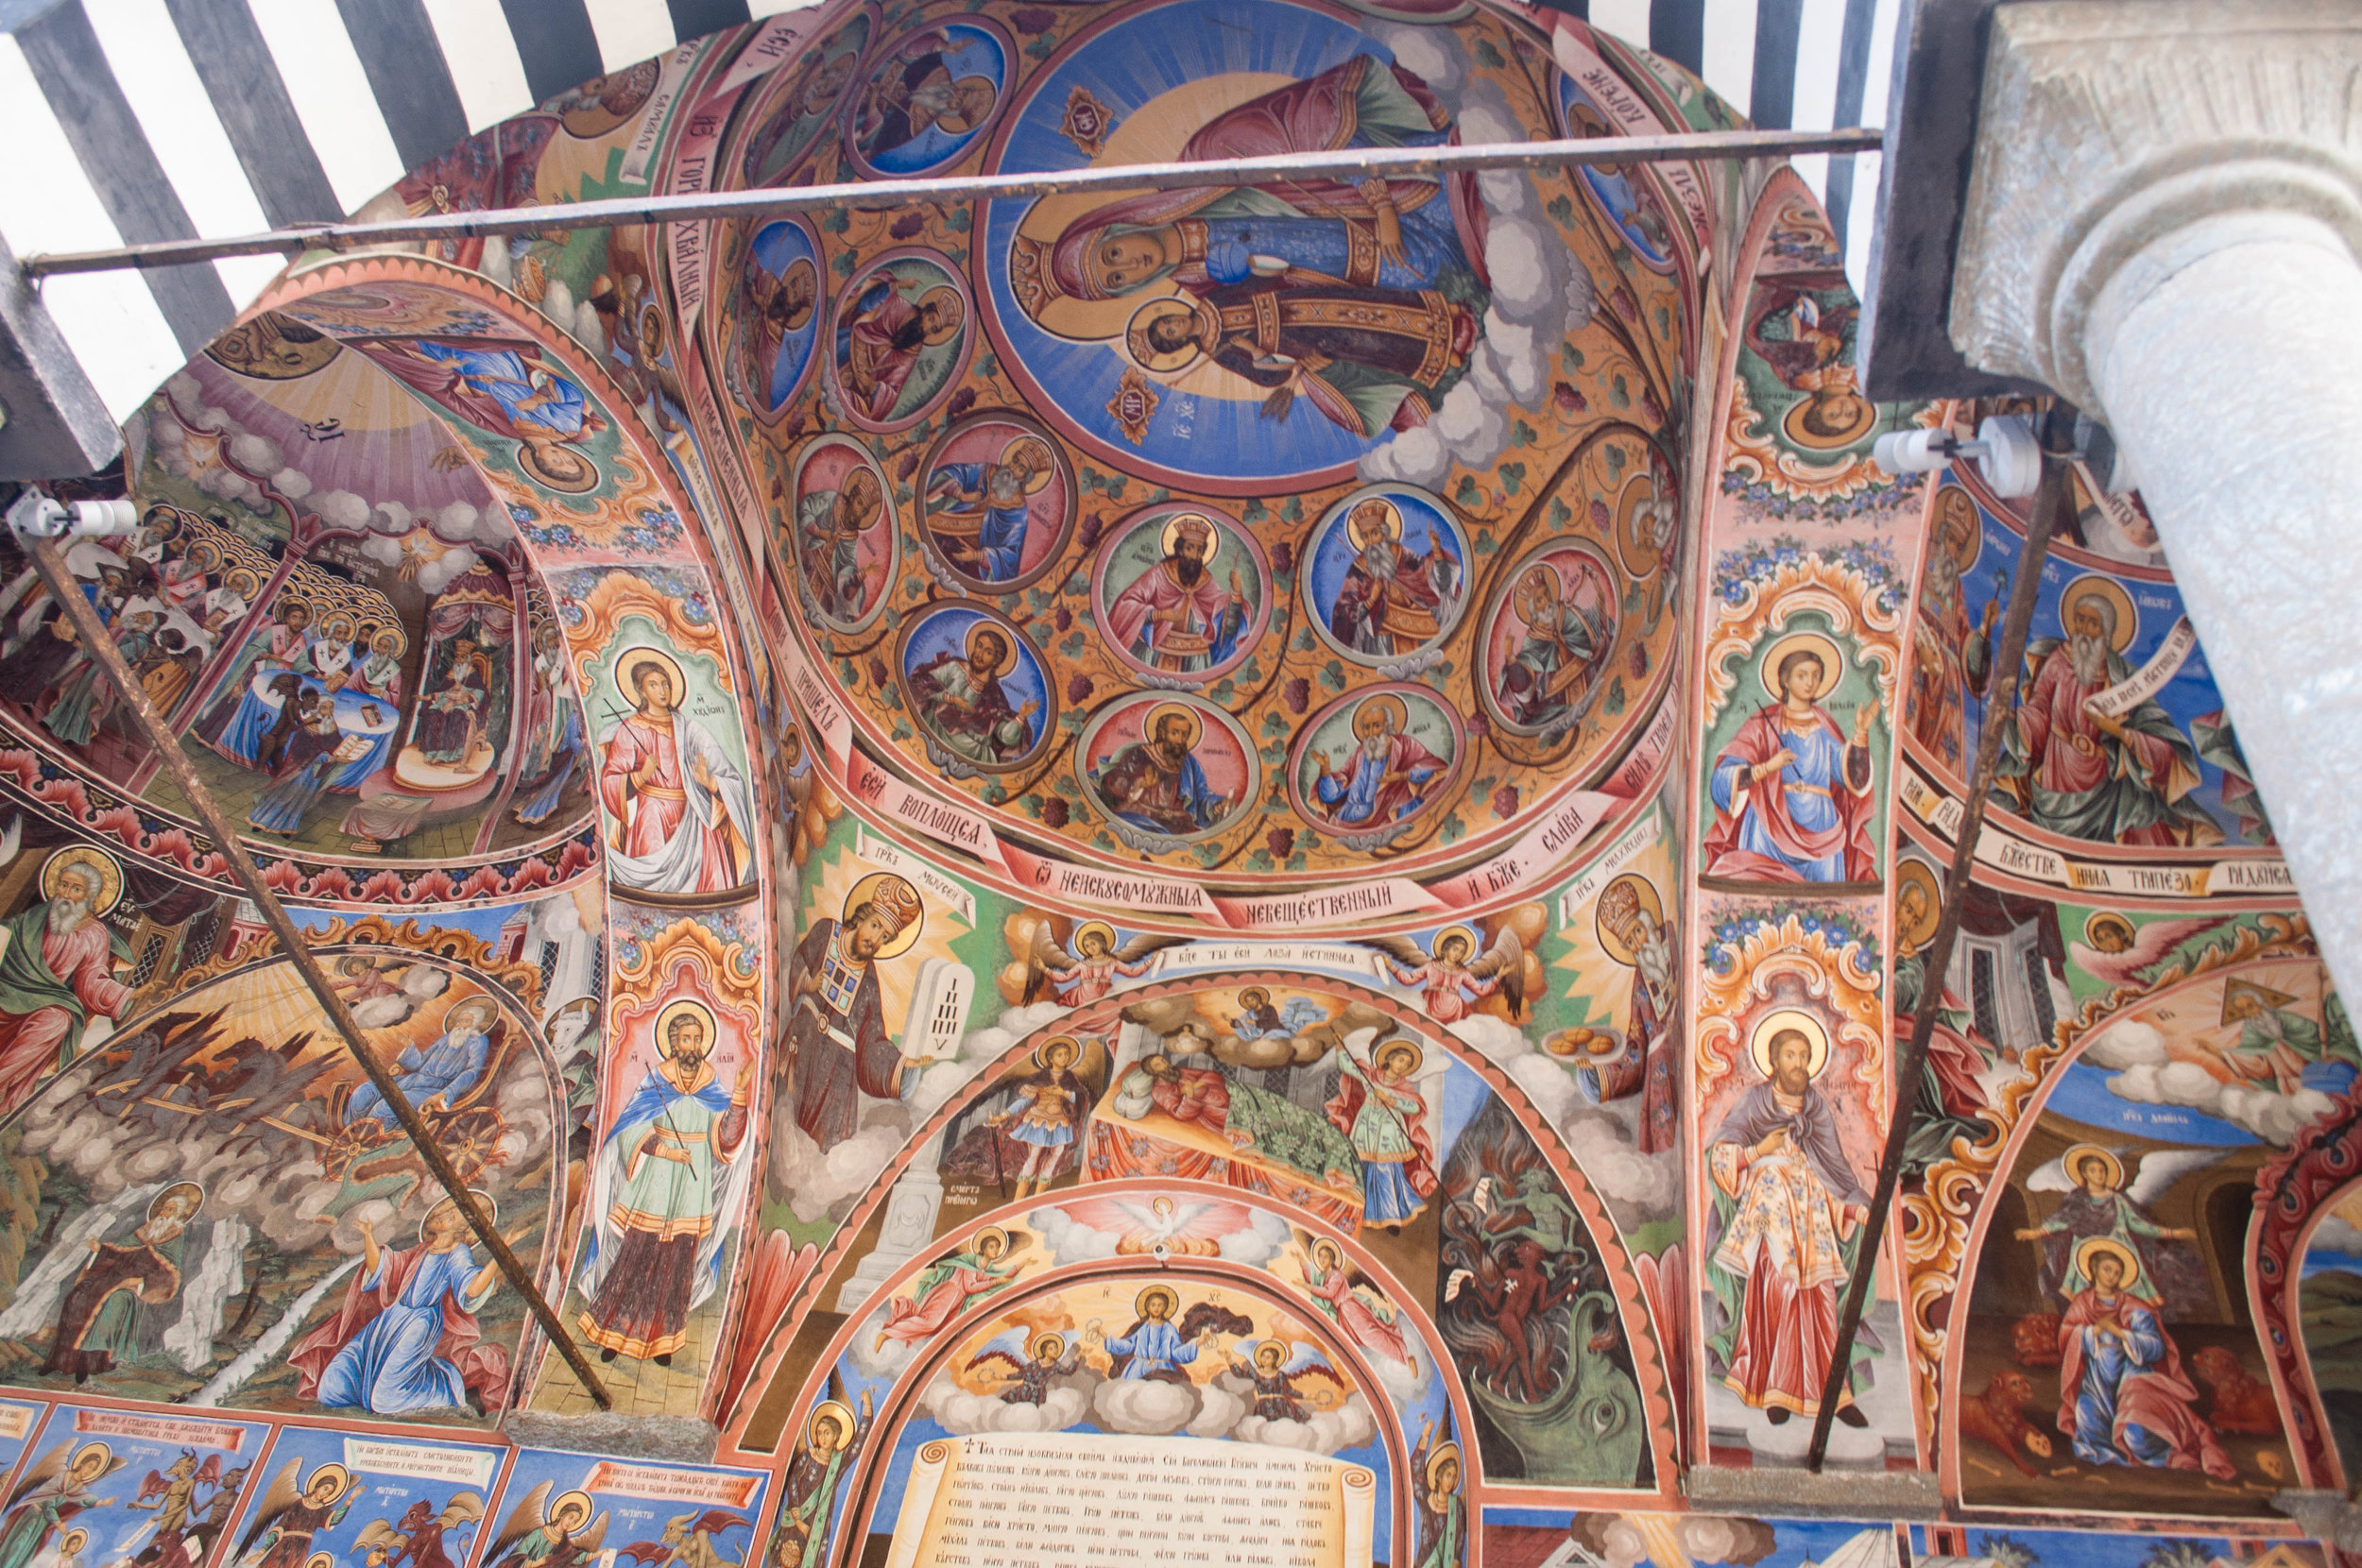 Rila monastery frescoes is a UNESCO World Heritage Site, this is a must-see in any Road trip Bulgaria